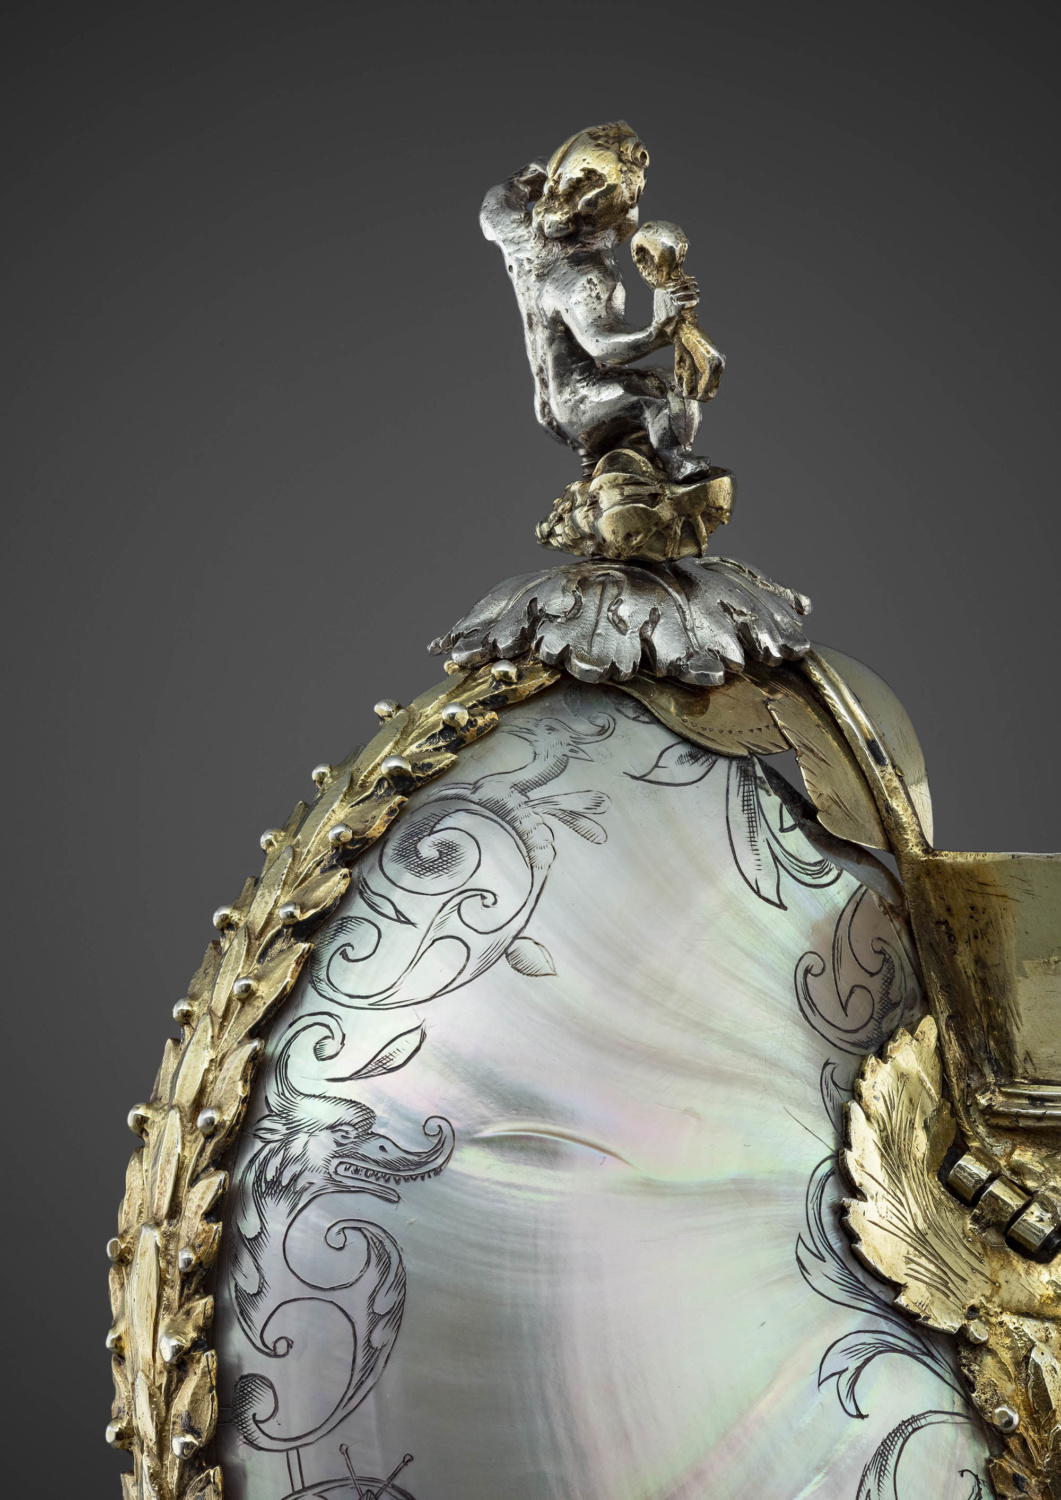 A parcel-gilt silver mounted nautilus shell - Galerie Kugel